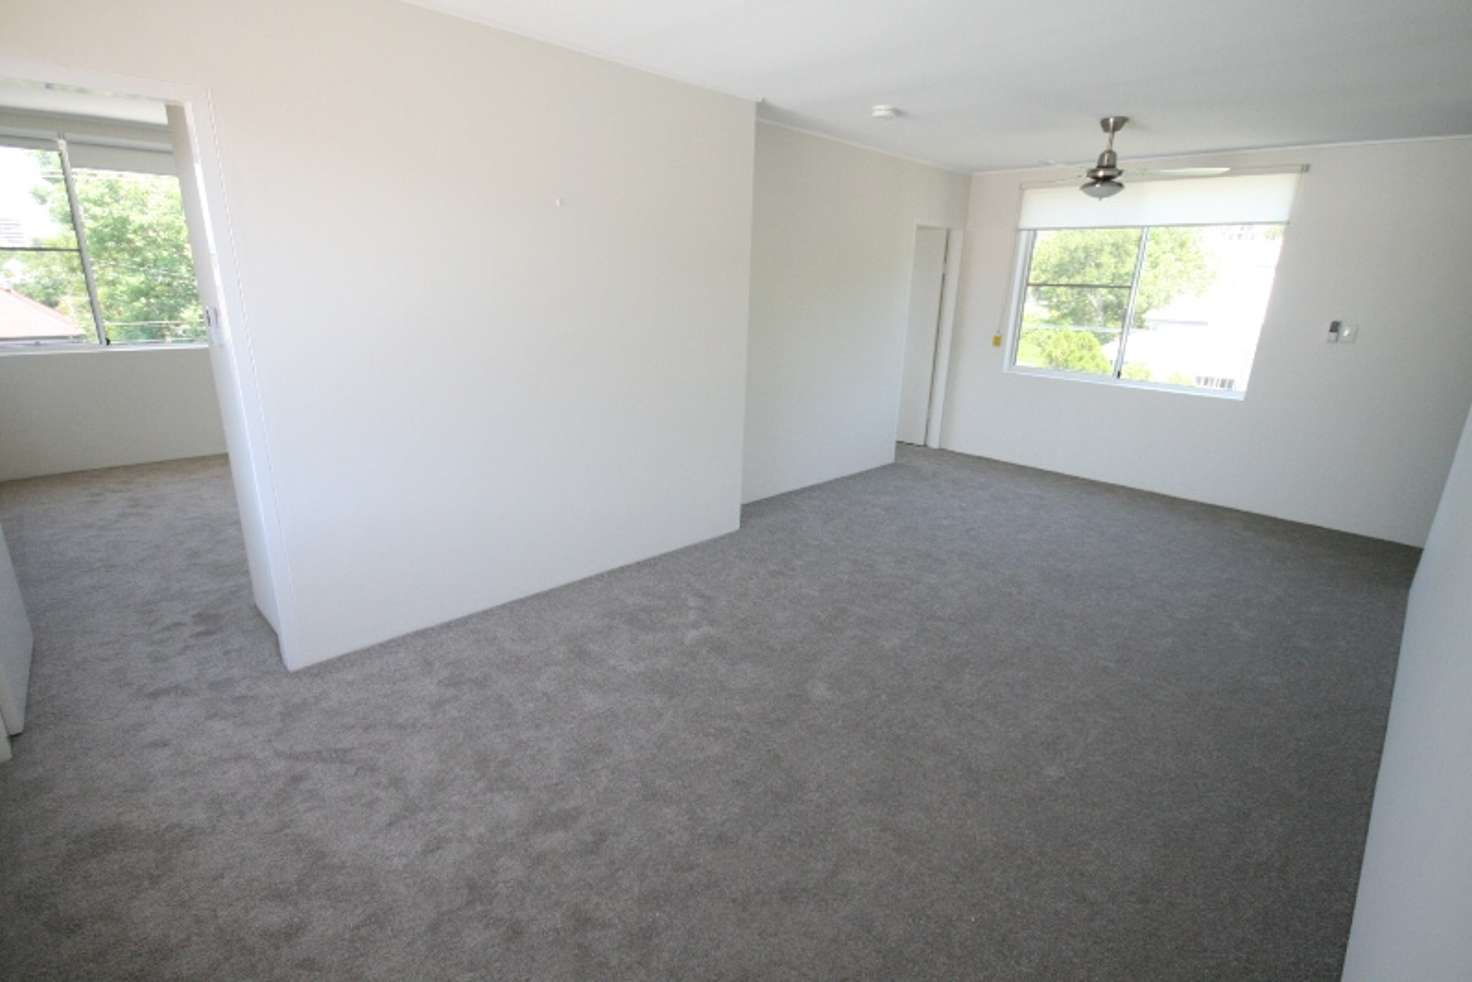 Main view of Homely apartment listing, 36 Pearson St, Kangaroo Point QLD 4169